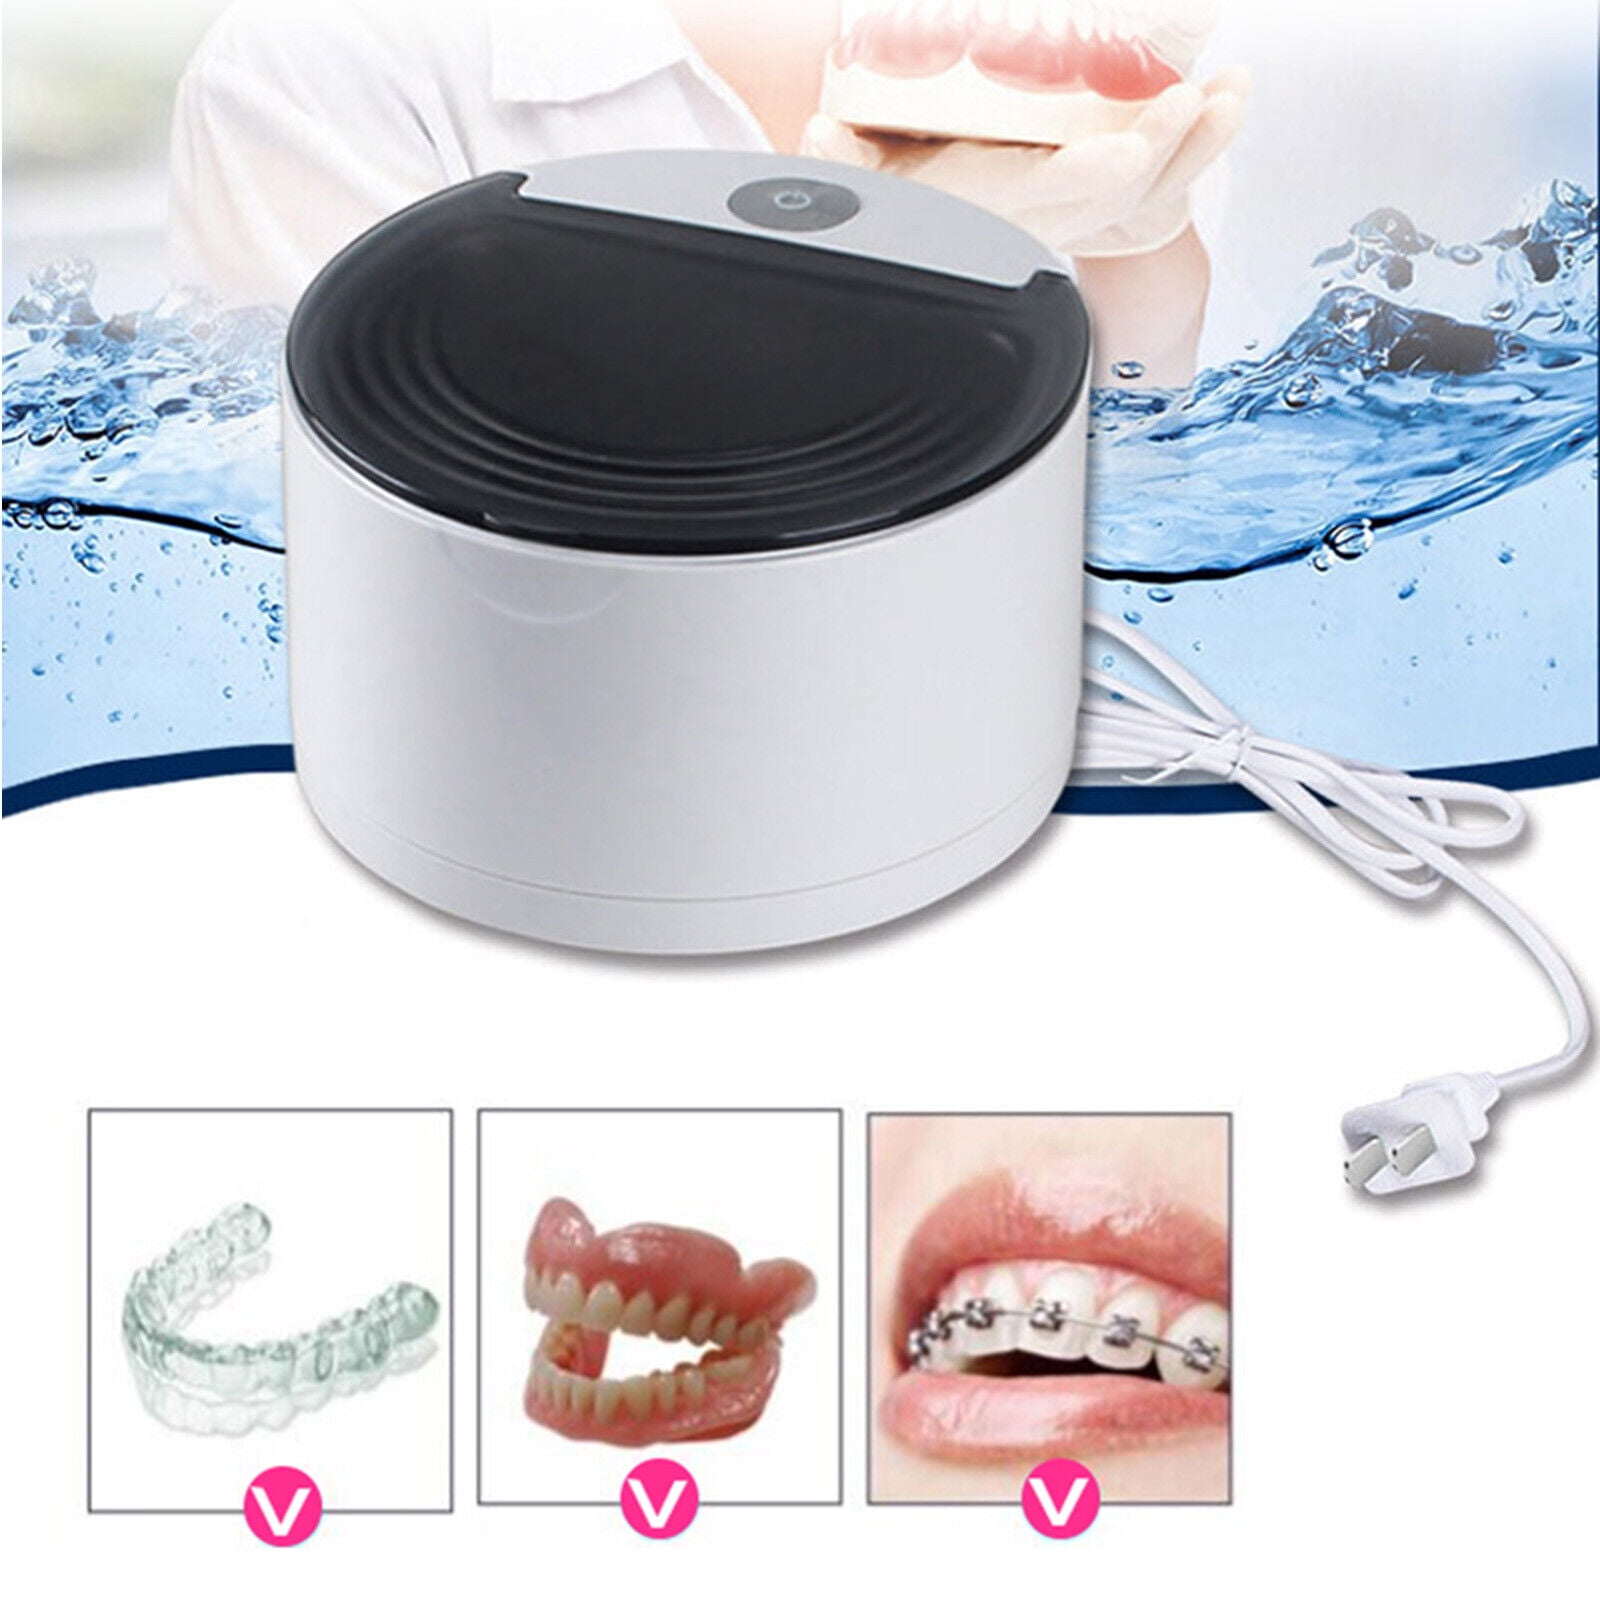 ultrasonic cleaner for mouth guards